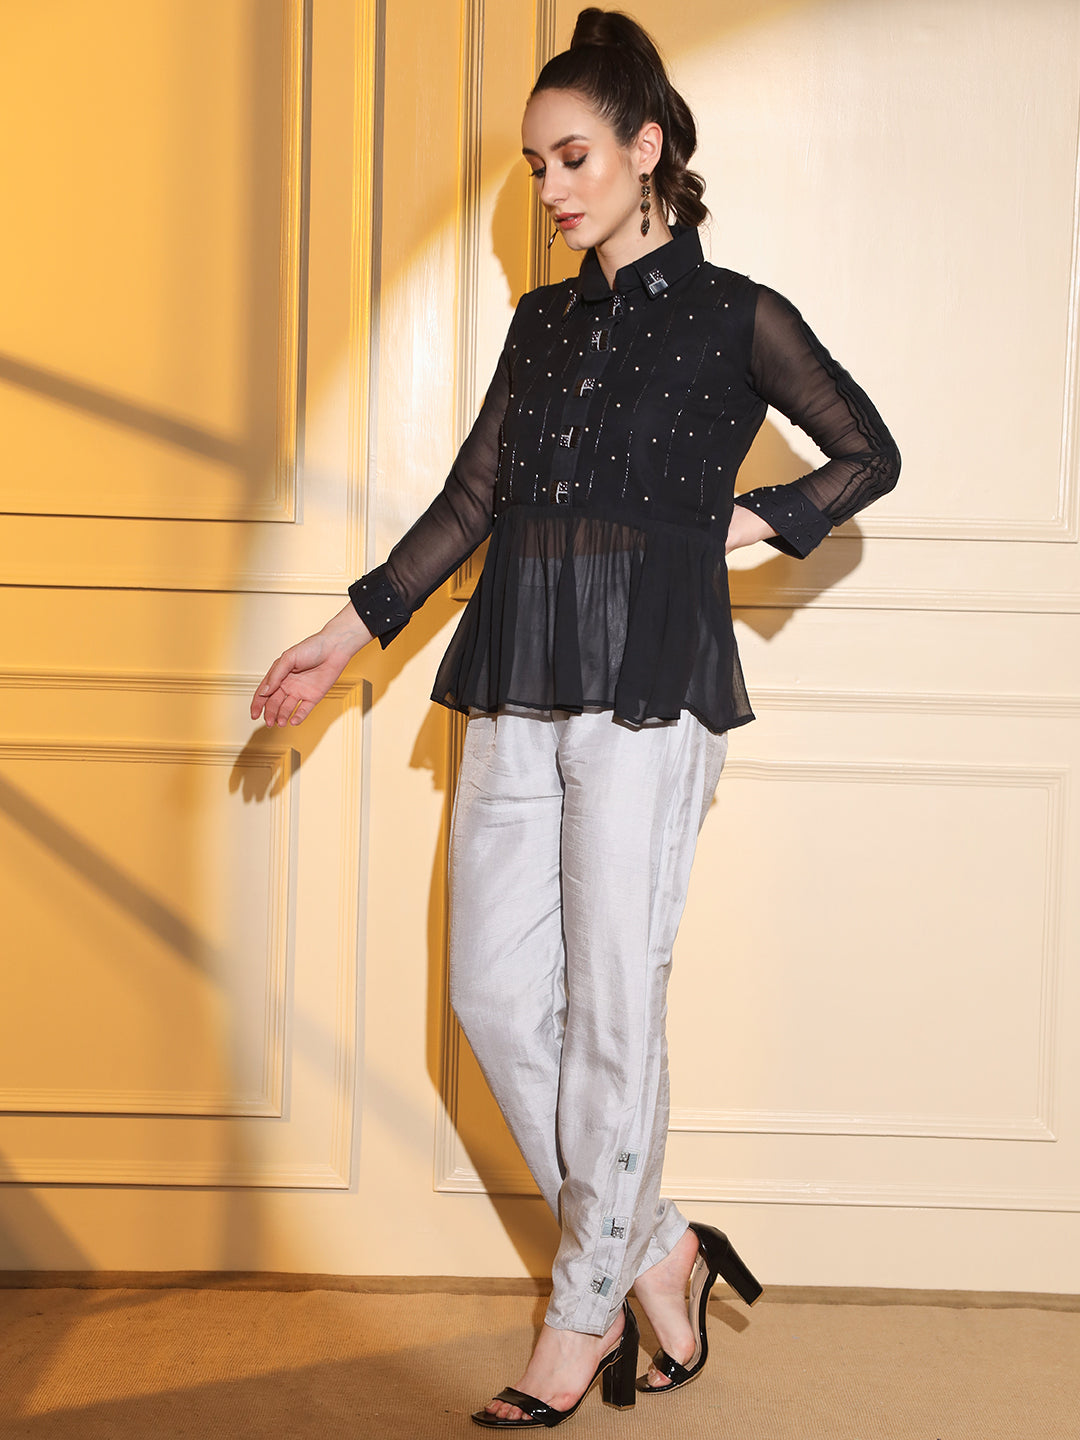 Chic and Sophisticated: Embroidered Black Peplum Shirt with Pants | Hues of India